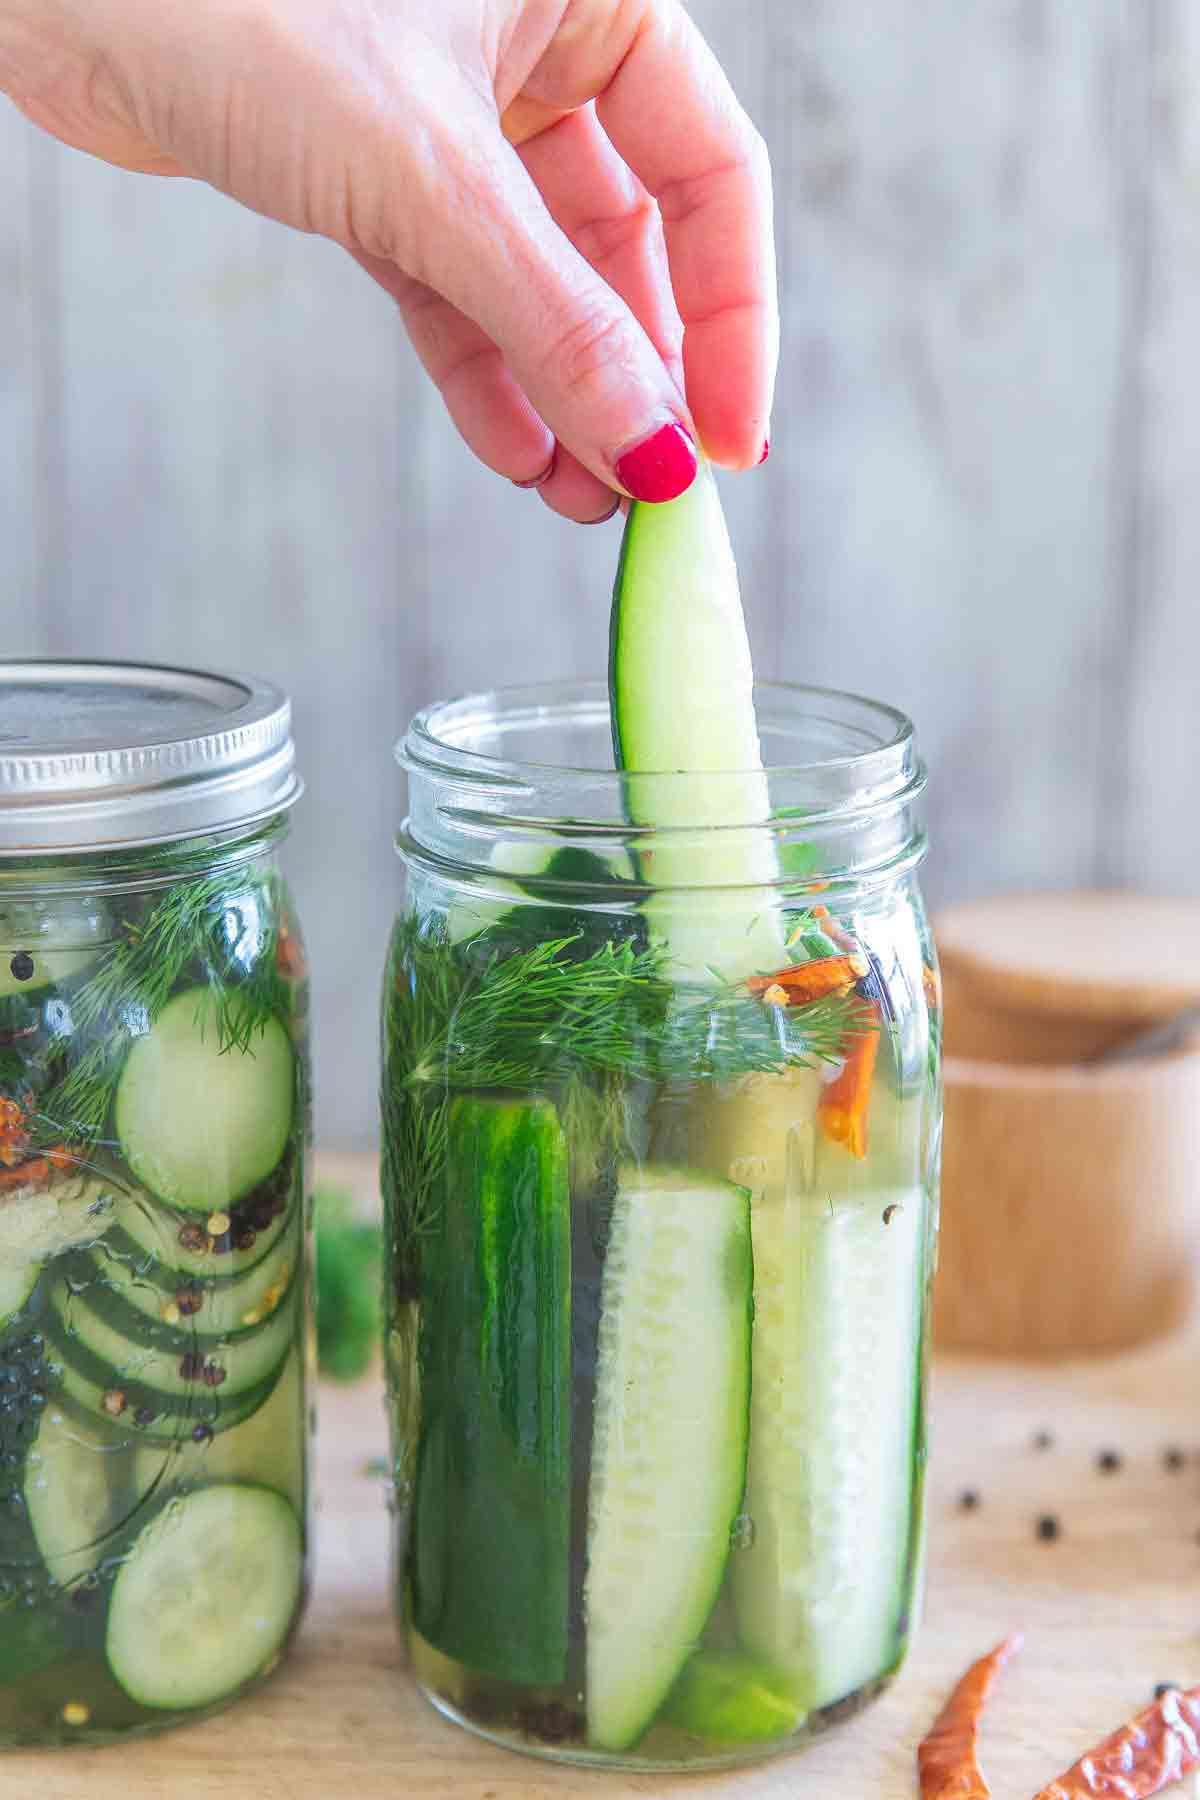 Easy refrigerator garlic dill pickles with or without dried chilis for spice are an easy homemade pickle recipe with no canning necessary!